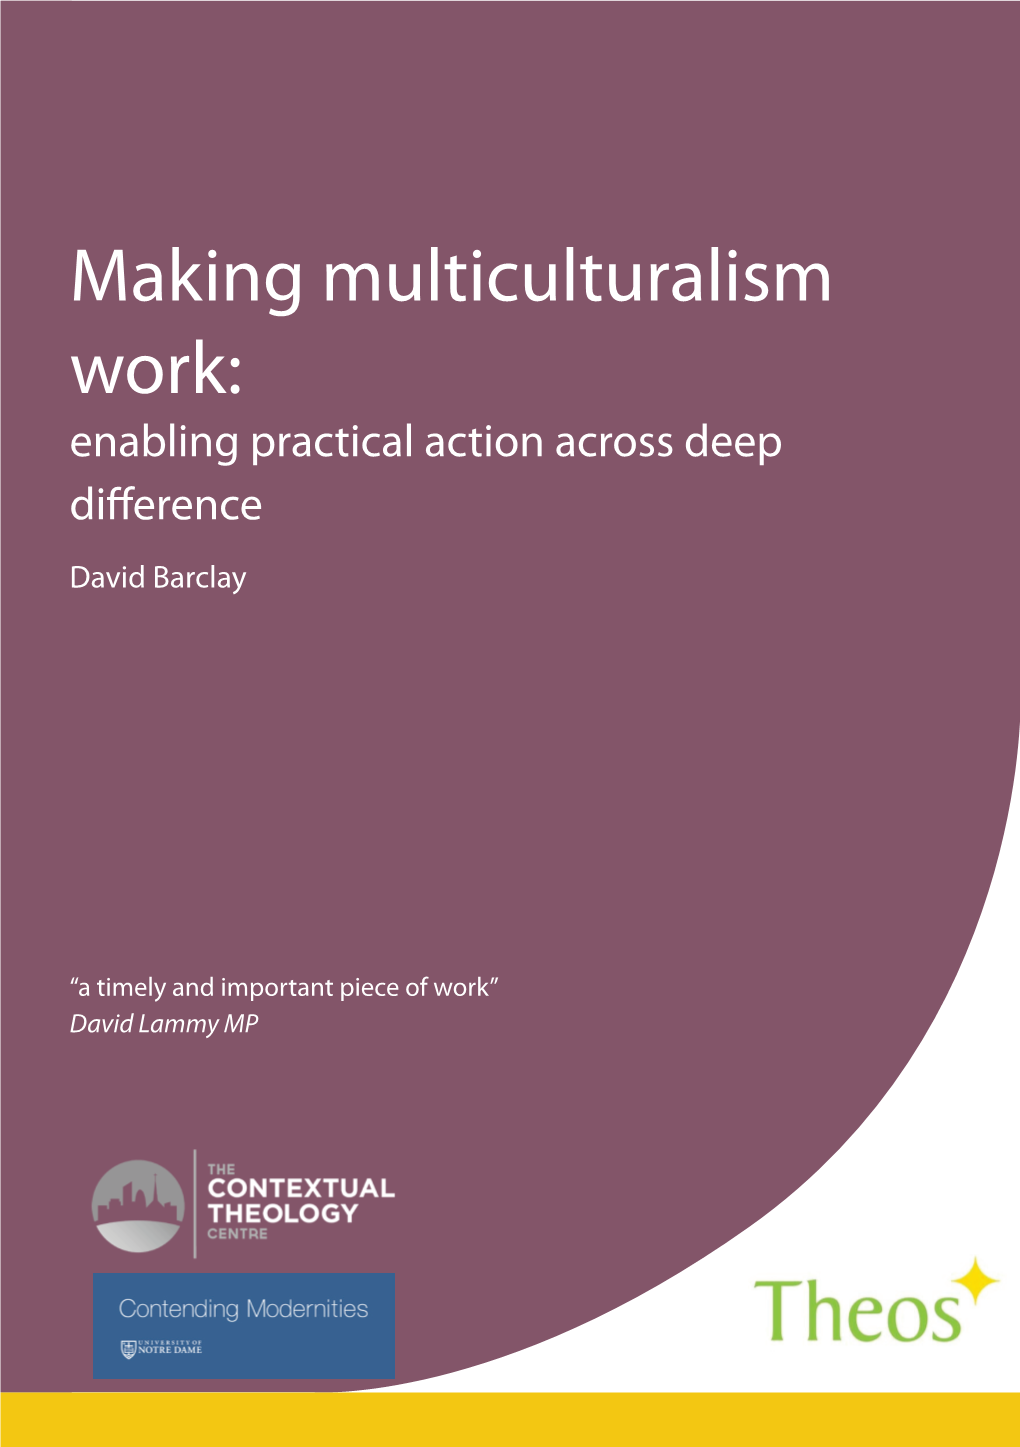 Making Multiculturalism Work: Enabling Practical Action Across Deep Difference David Barclay Making Multiculturalism Making Work David Barclay